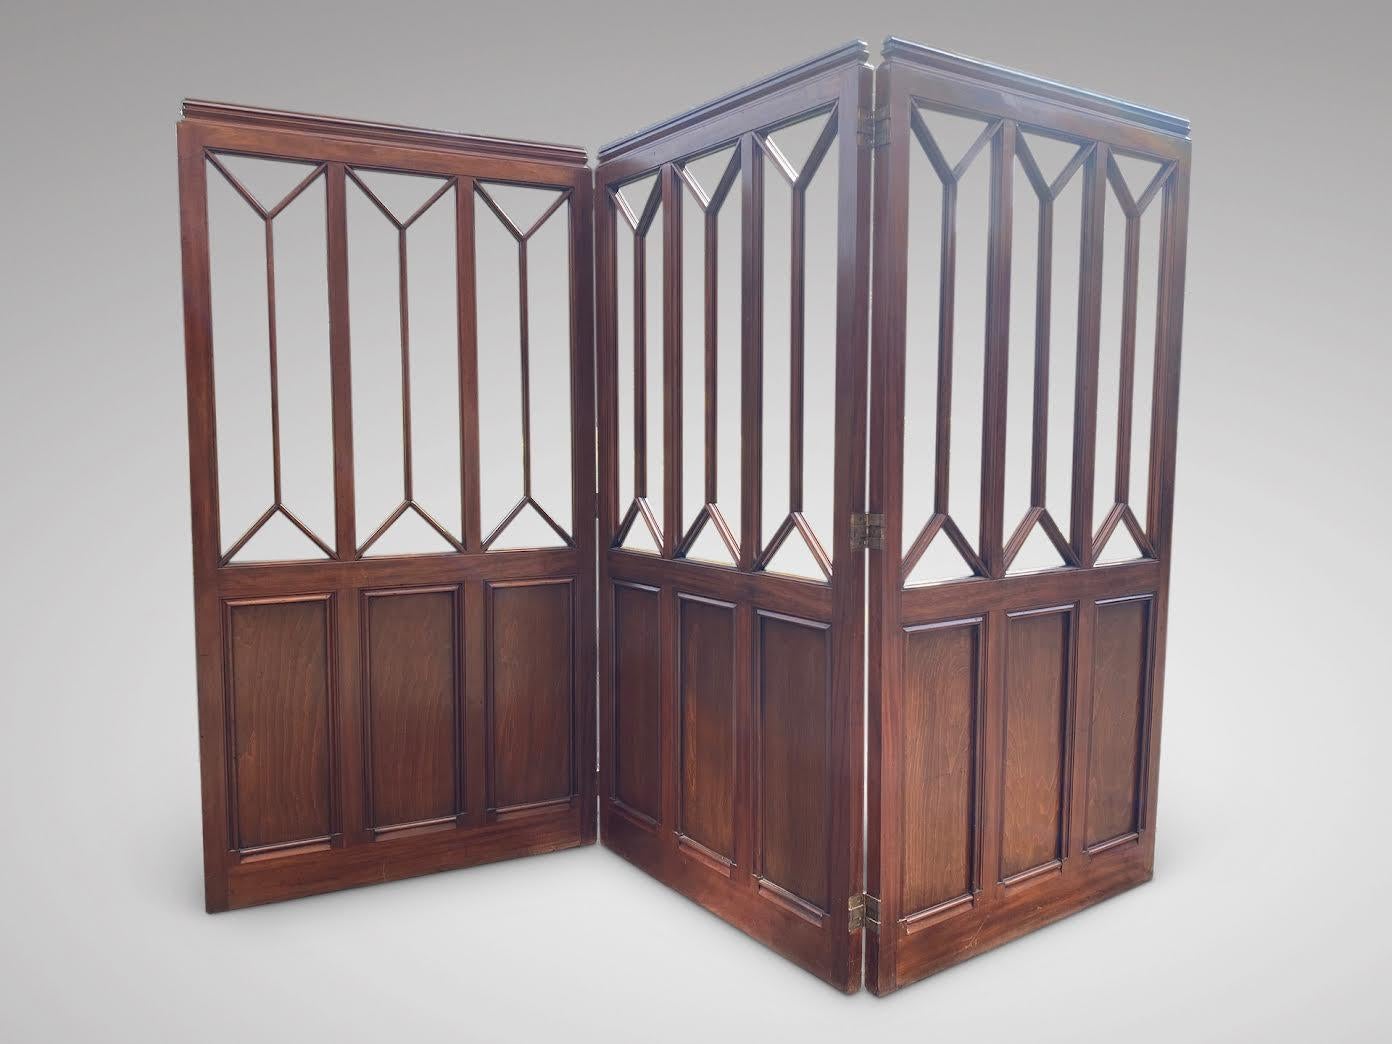 A stunning quality 19th century mahogany folding three panel dressing screen or room divider, featuring lovely mahogany panels below and astragal openings to the top part. Three mahogany wooden panels on triple swing hinges. The triple swing hinges